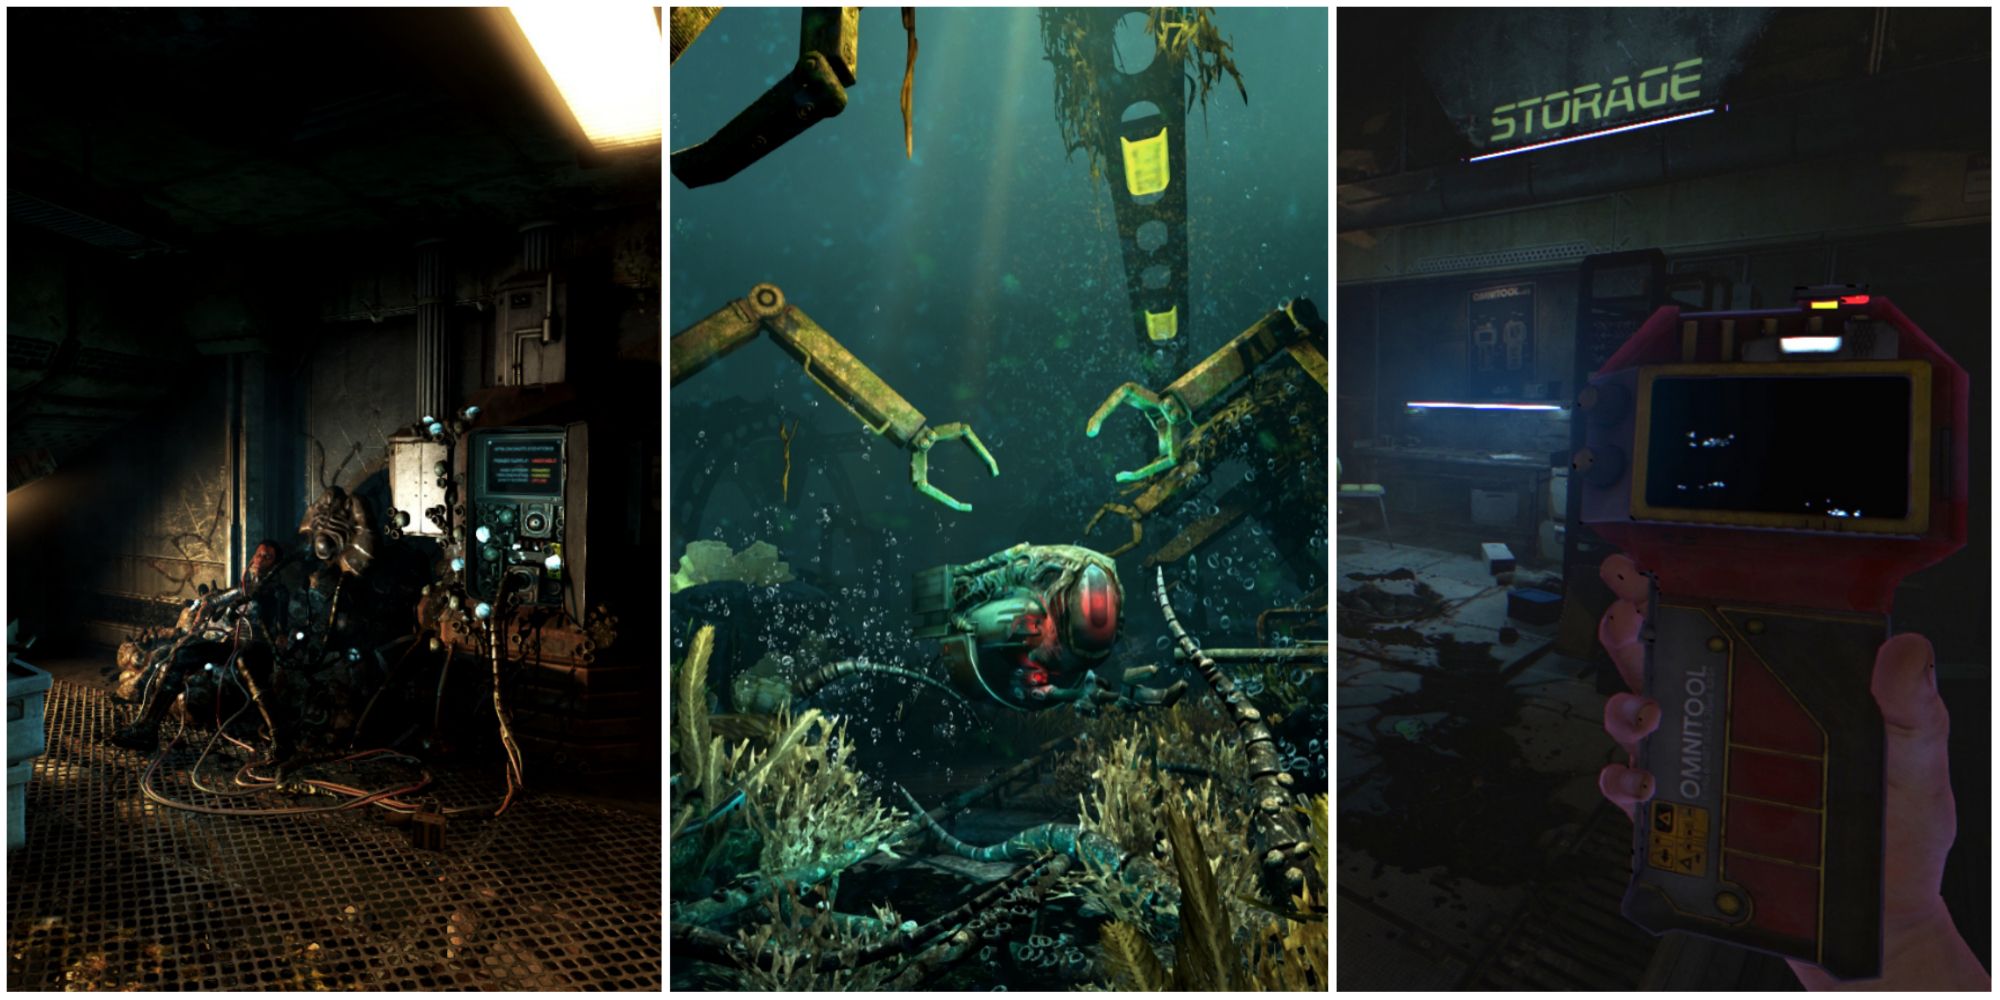 soma spooky robot creature, underwater pod, storage area and tool featured